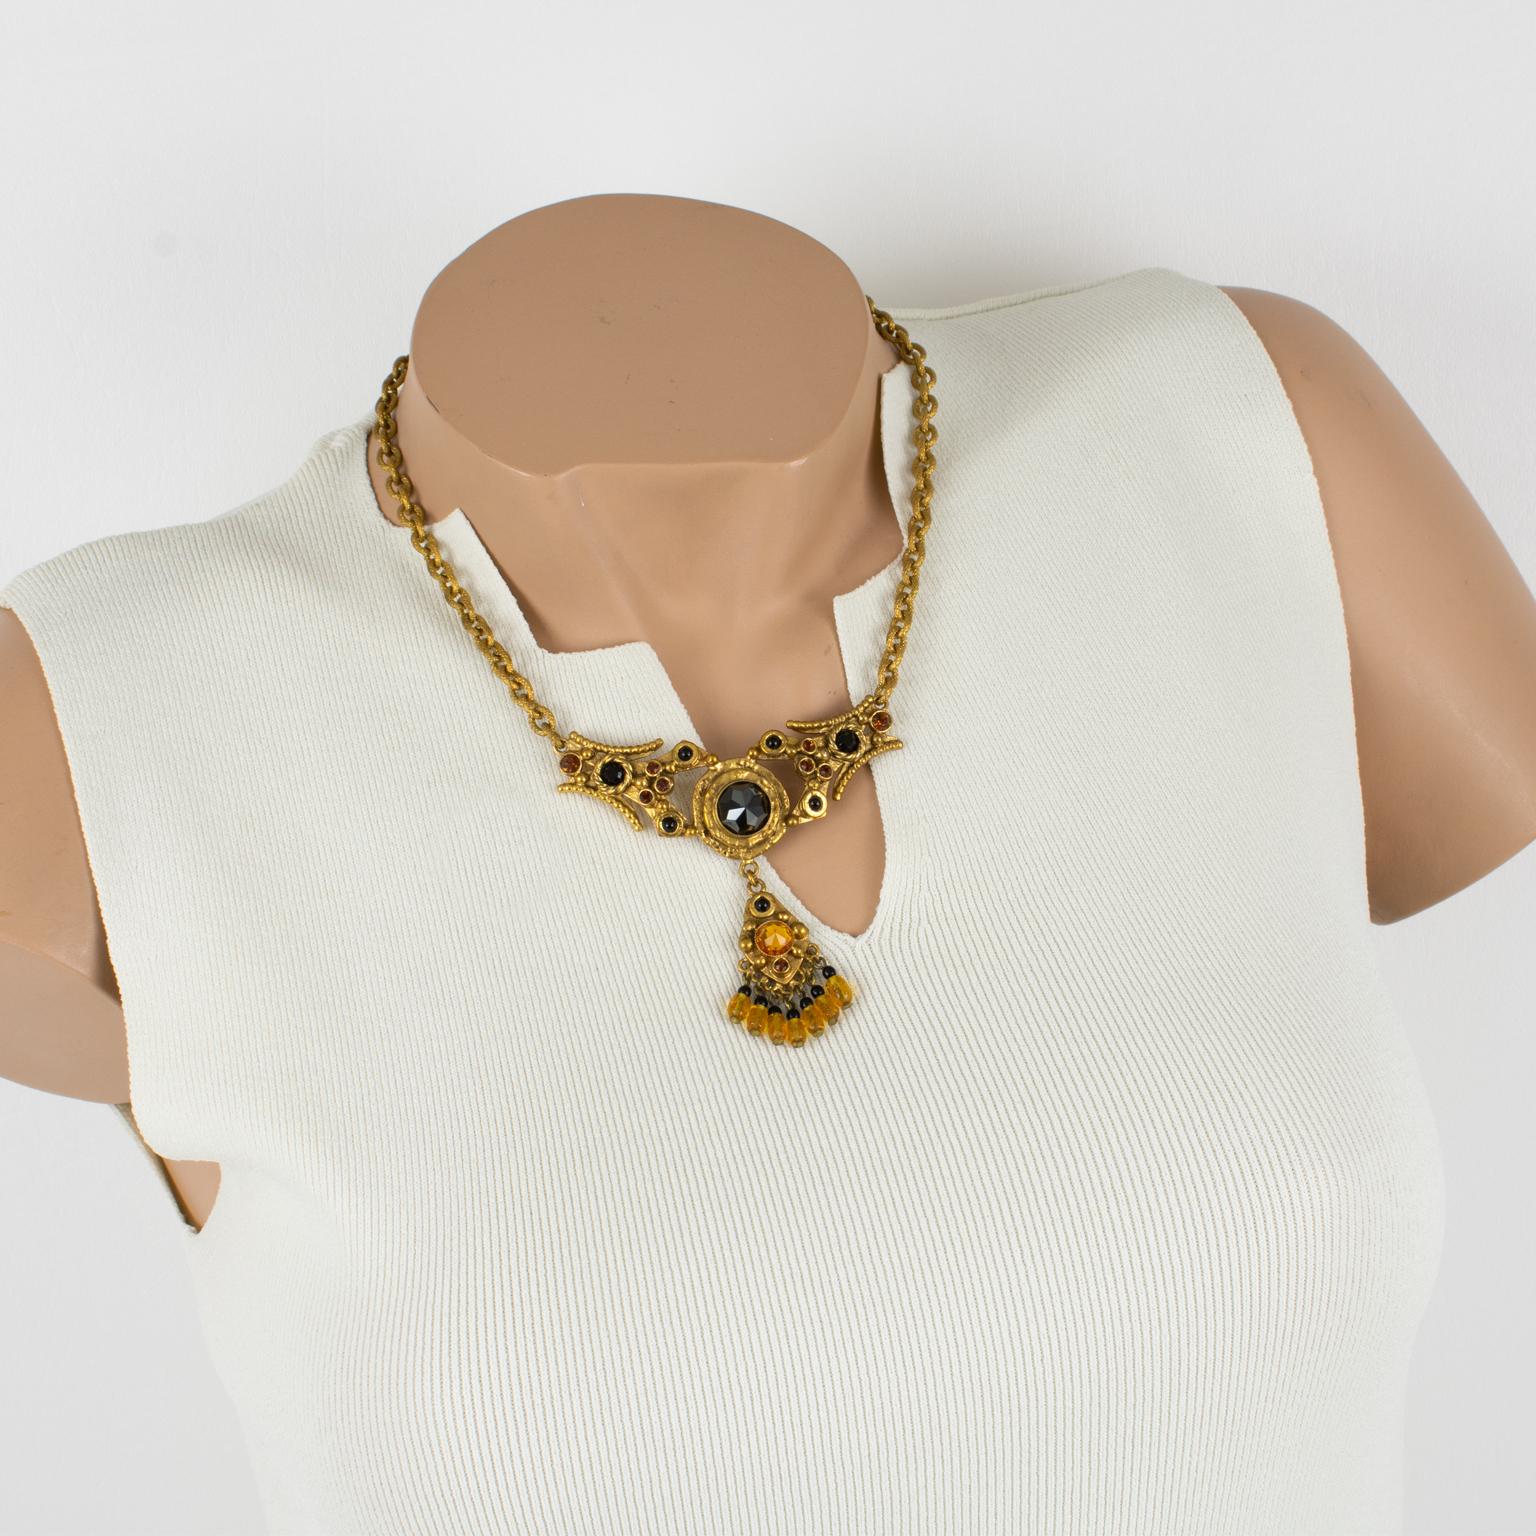 This is a stunning Henry Perichon (aka Henry), Medieval revival gilded bronze pendant necklace. The bronze metal pendant with antique Middle-Age design influences is ornated with faceted French black jet glass cabochons, orange topaz, and yellow